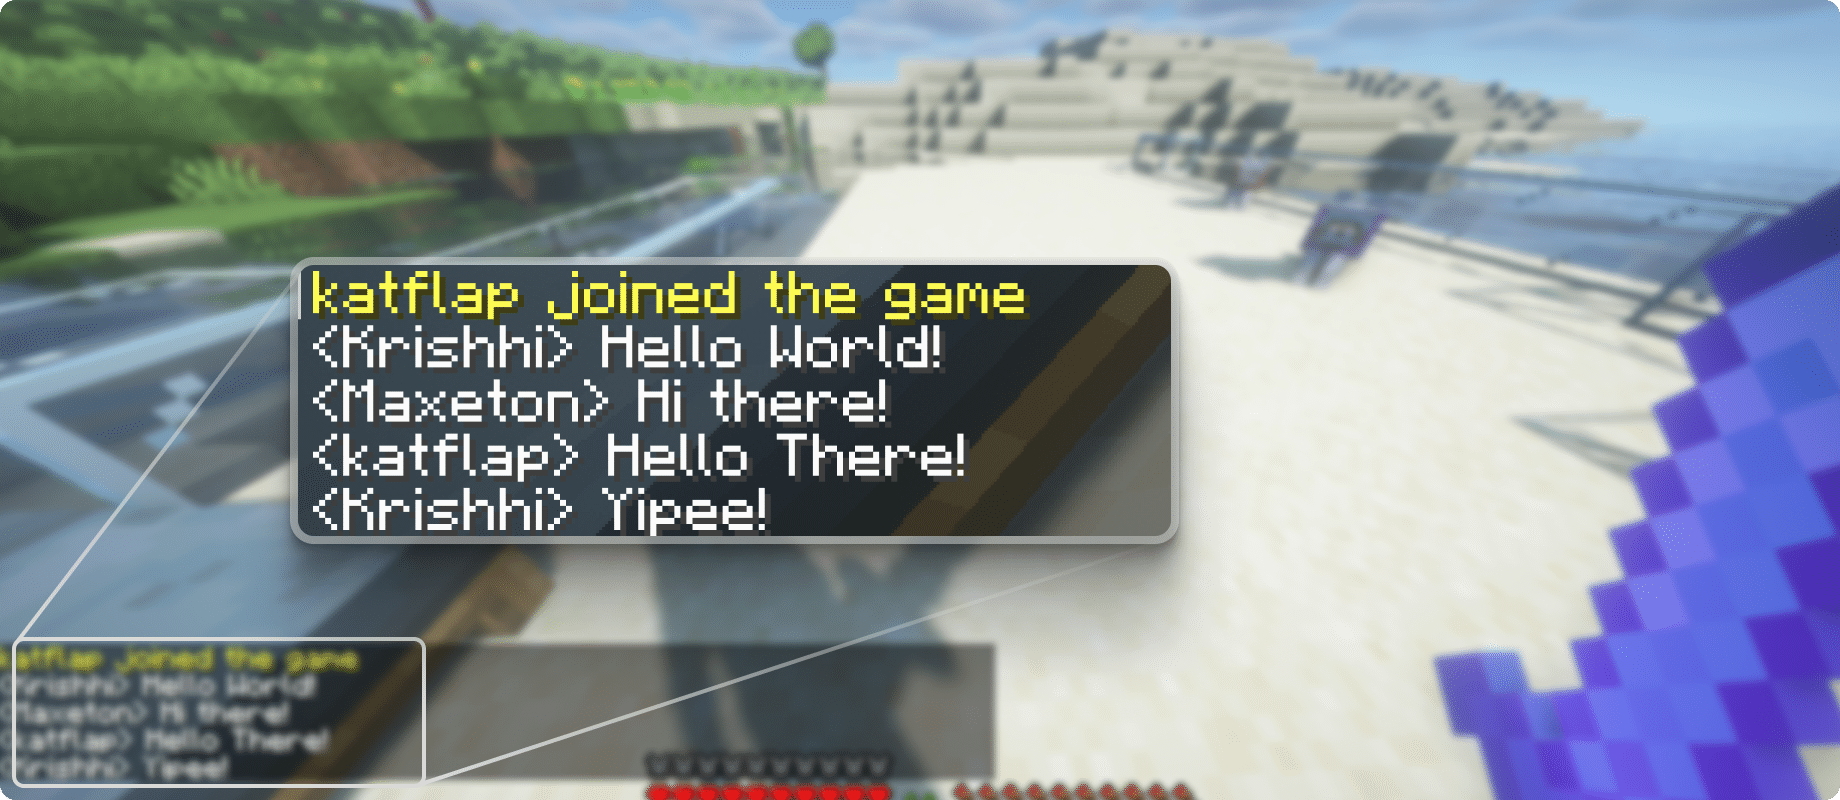 Minecraft Connects to Discord  Chat, Sync, Commands & Invite